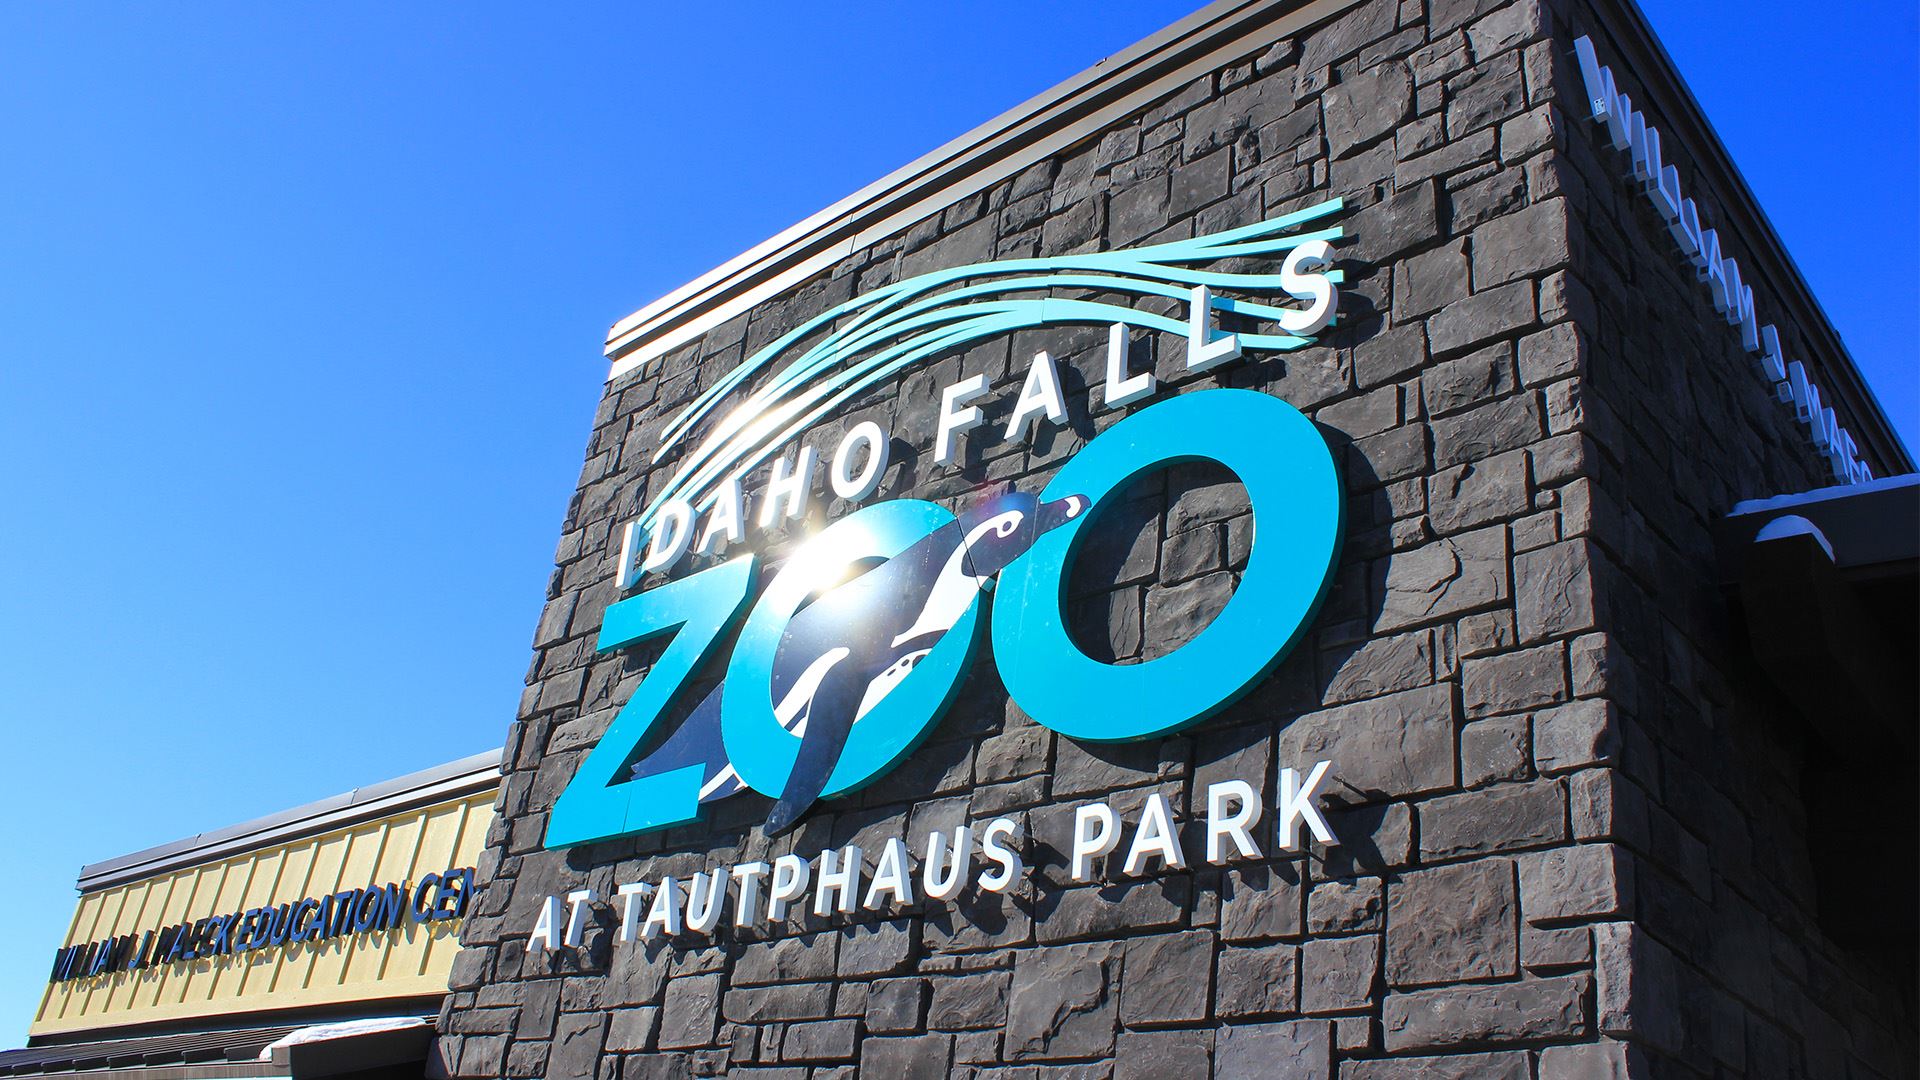   
																Experience the Idaho Falls Zoo in a unique after hours opening 
															 